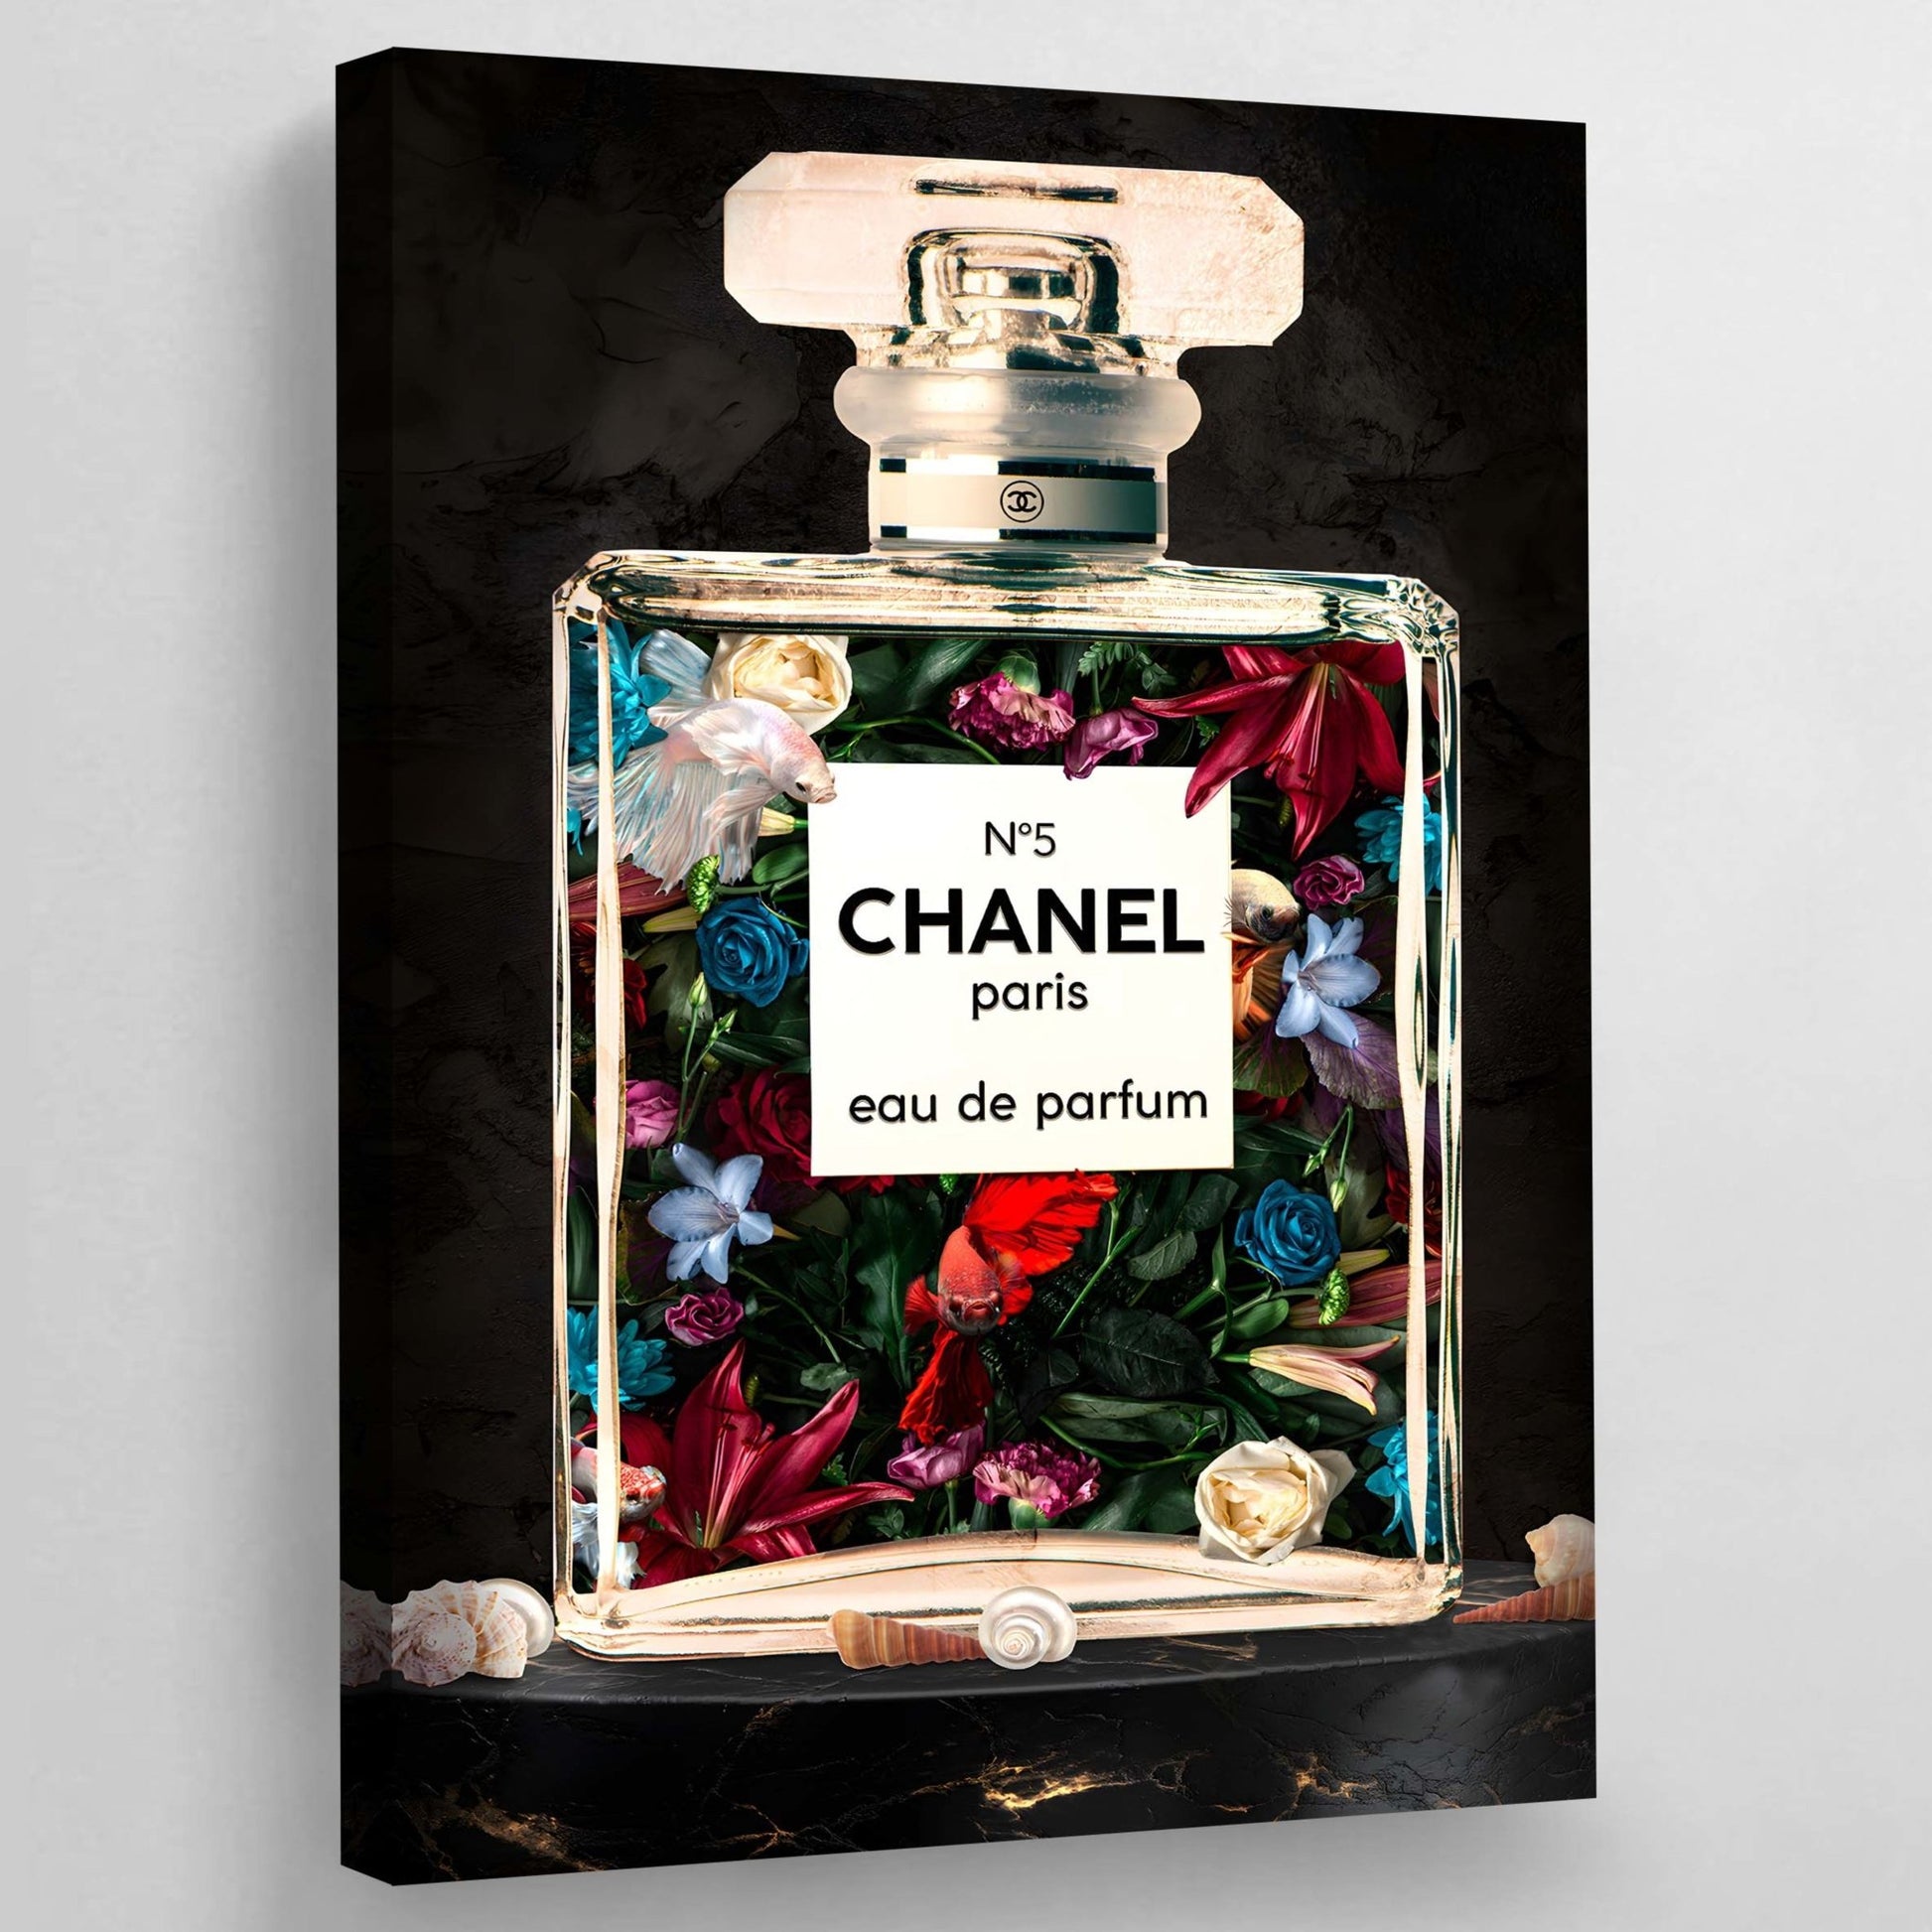 The Best Chanel Perfumes of All Time